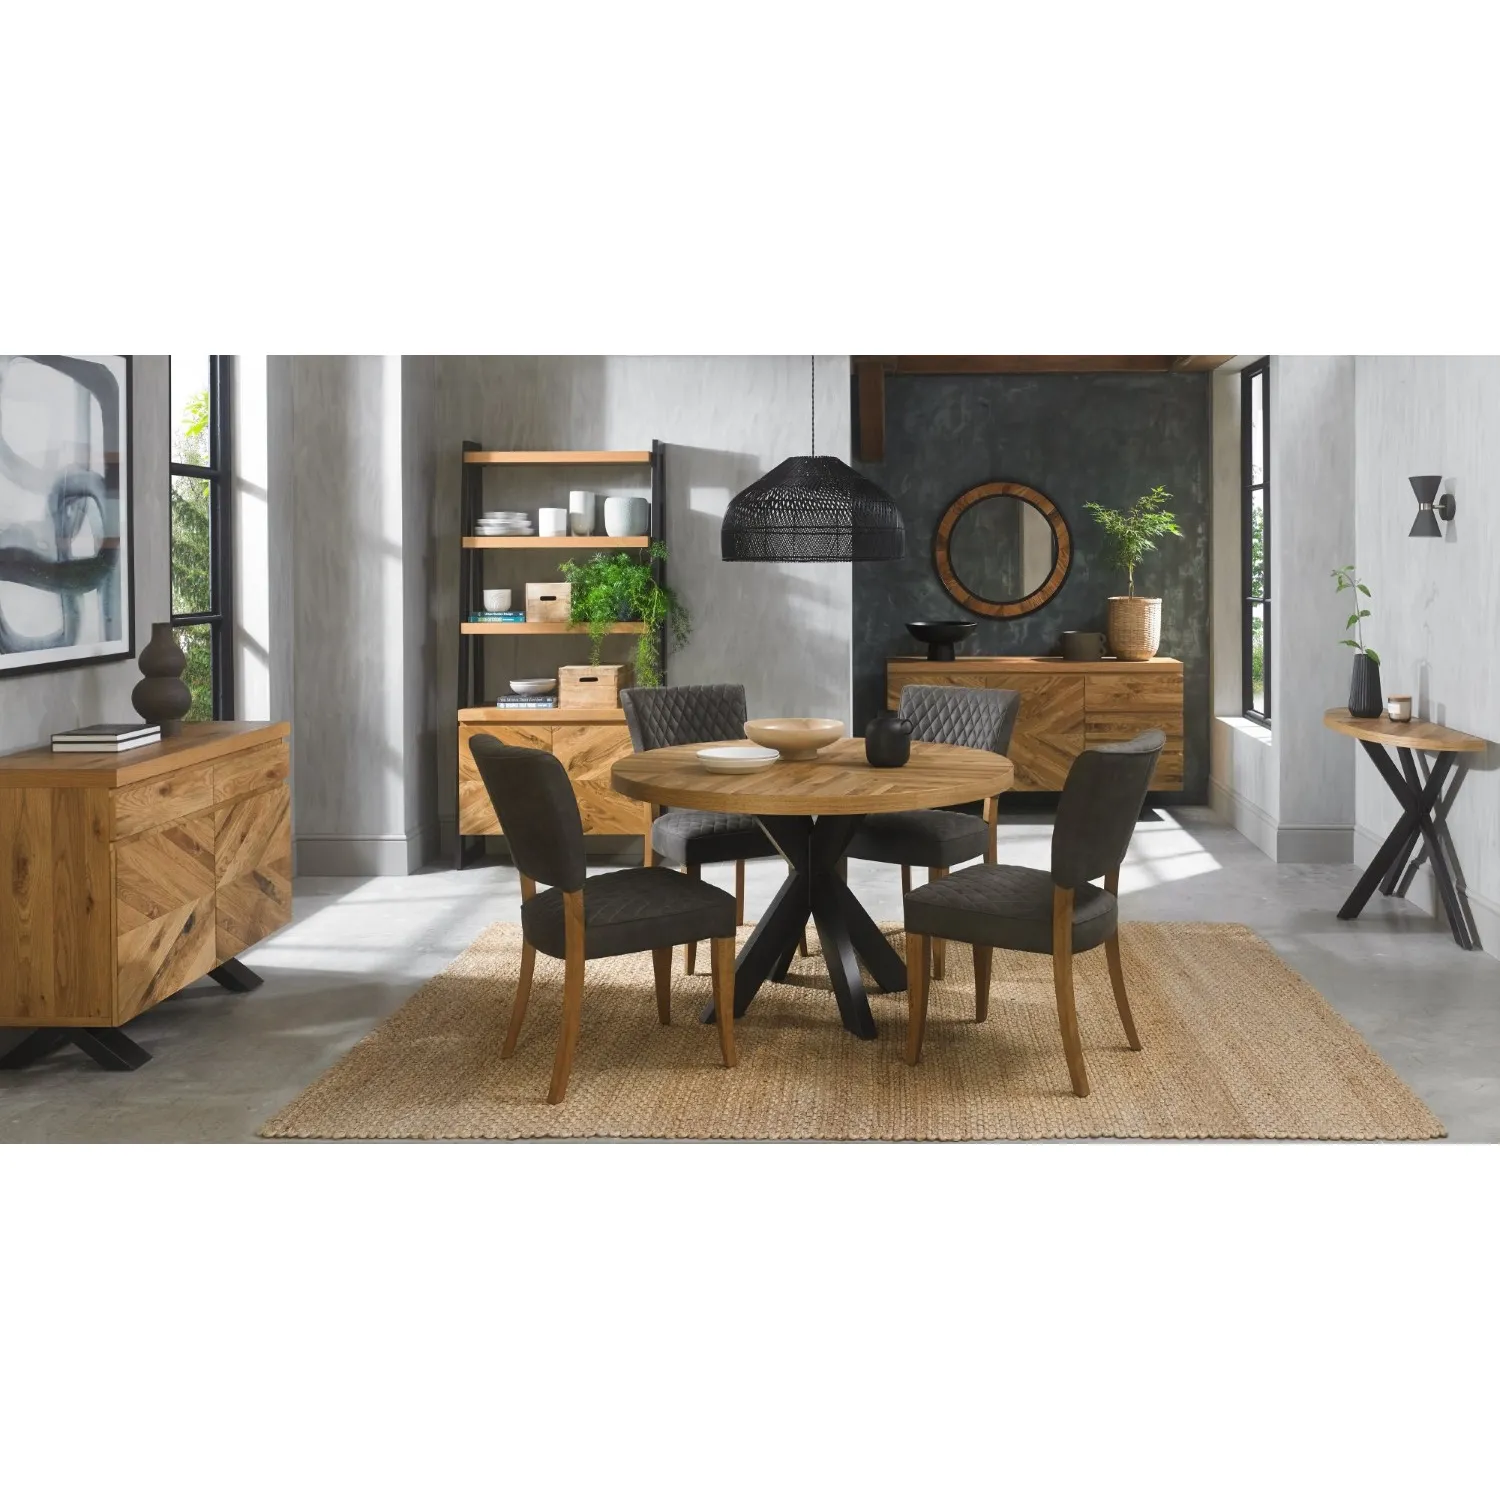 Rustic Oak Round Dining Table Set 4 Dark Grey Fabric Chairs